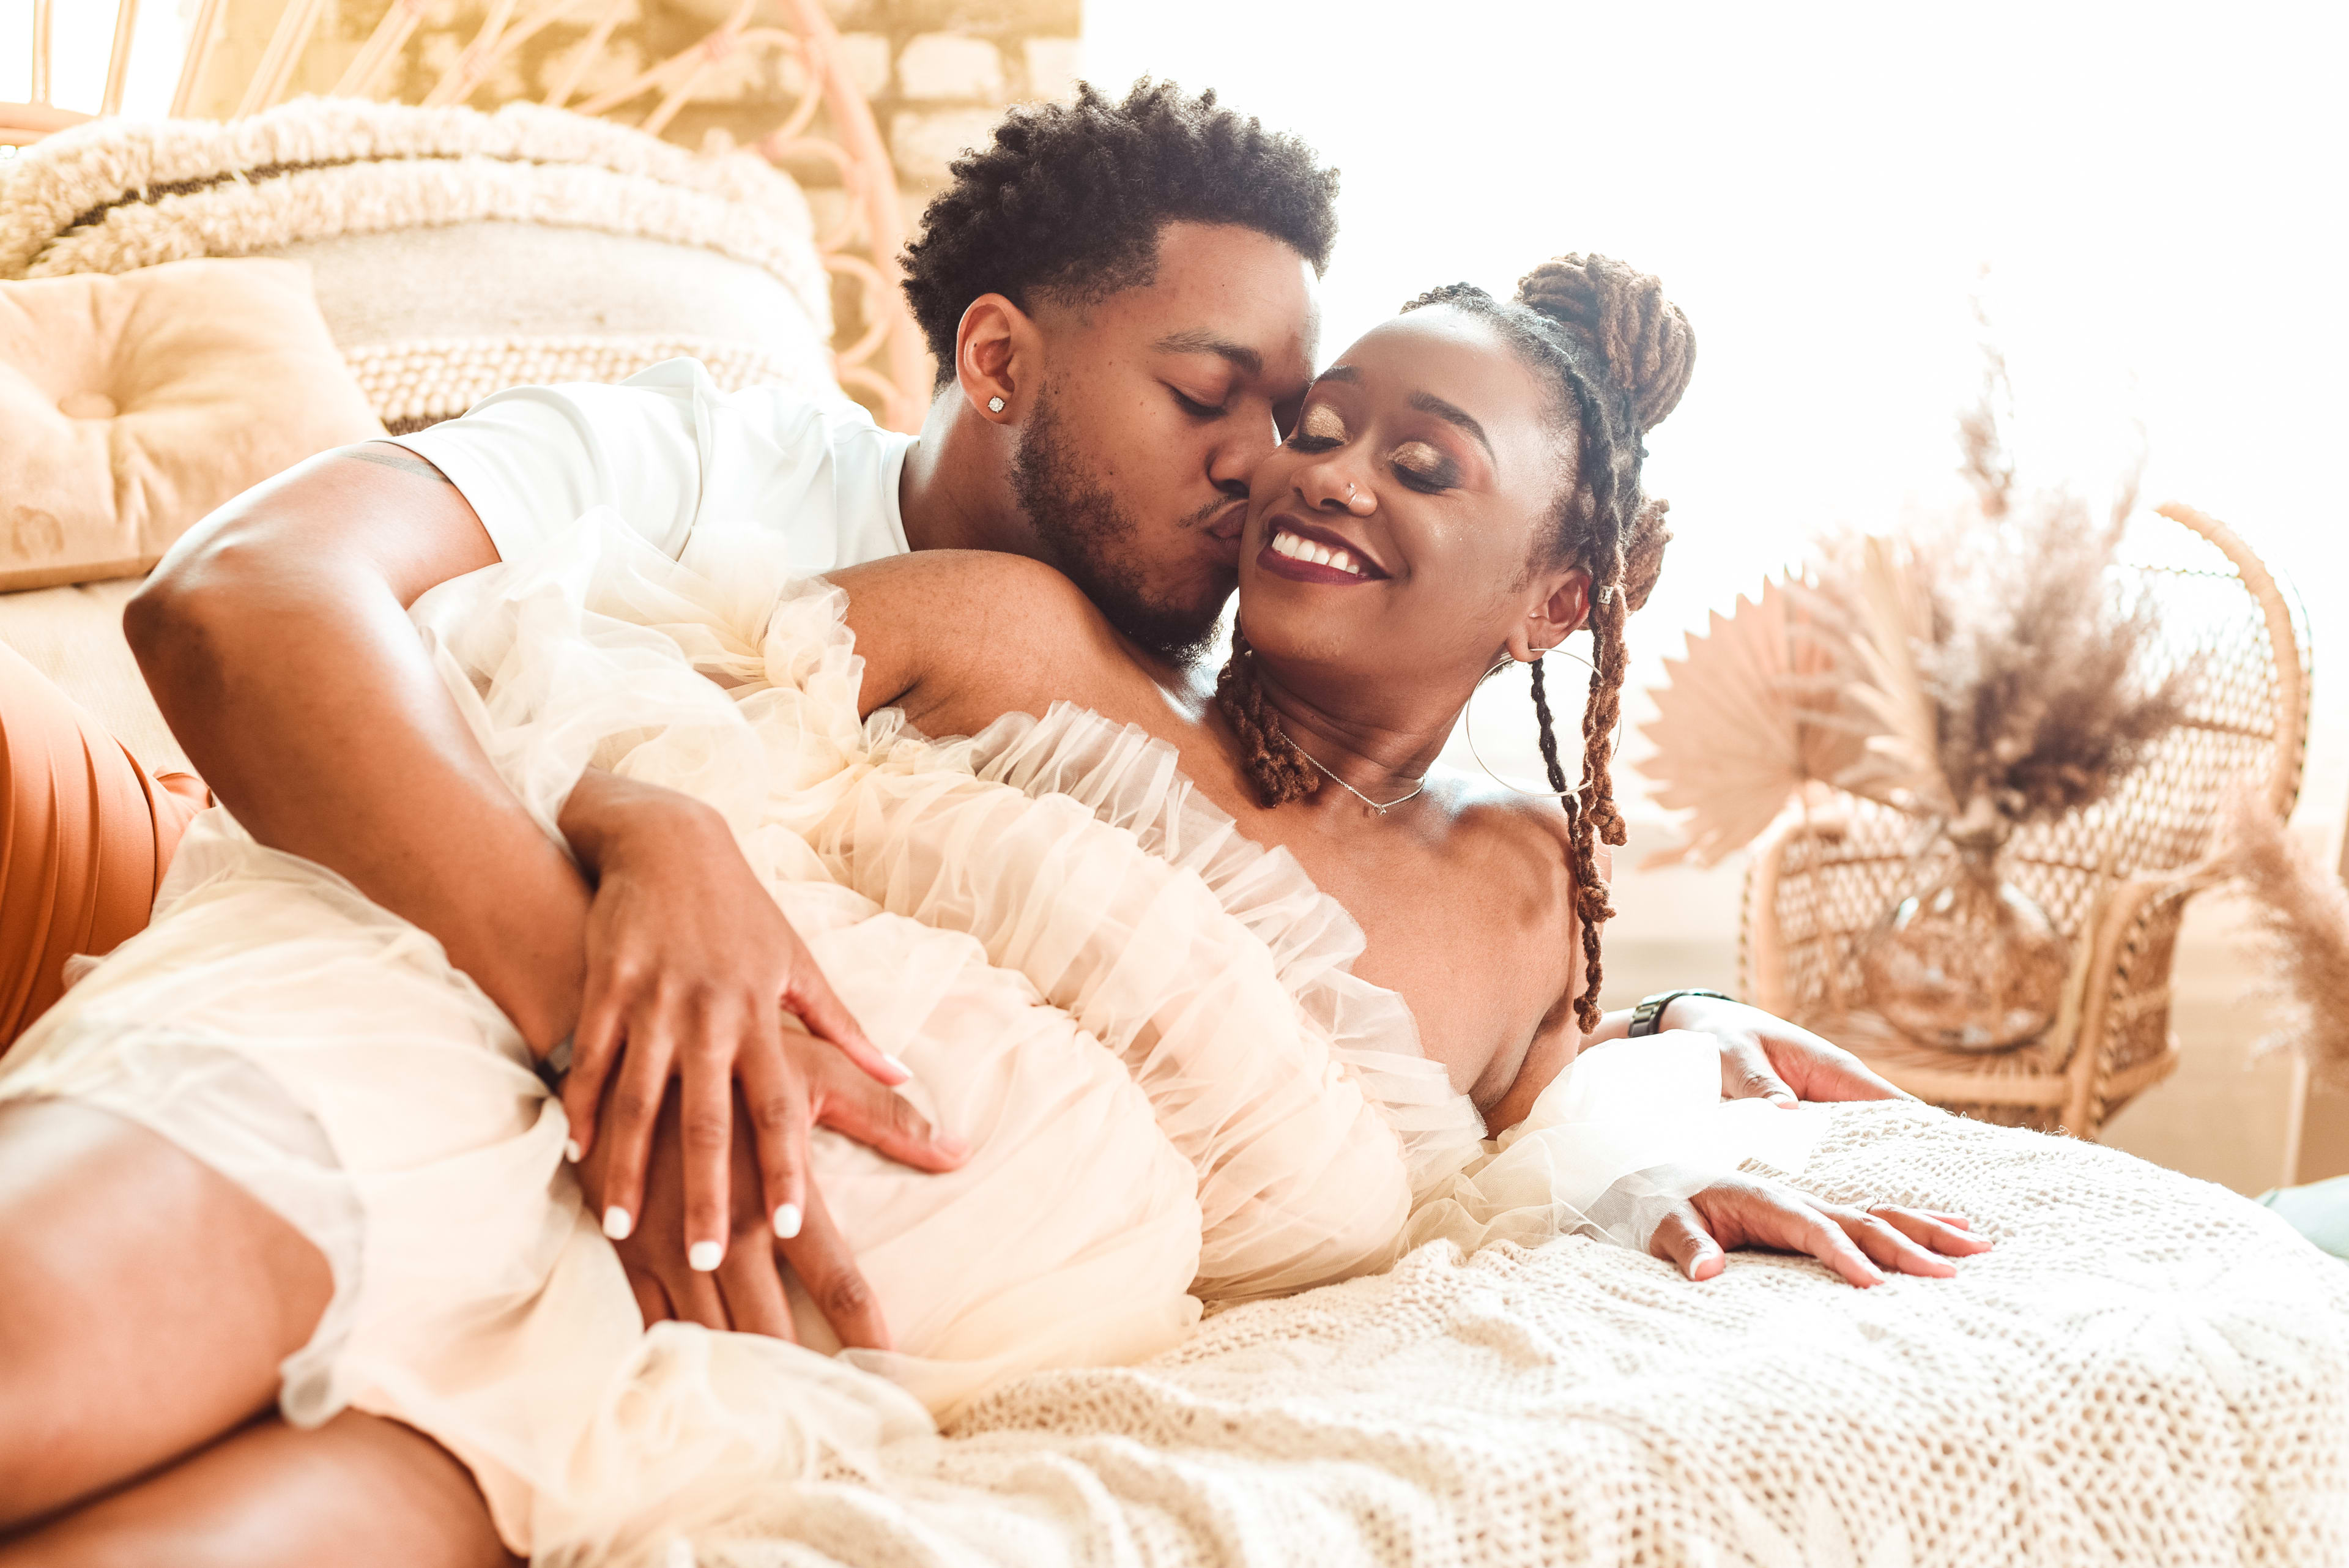 a white maternity photoshoot of a man and woman laying on a boho-style bed in beige bedding.